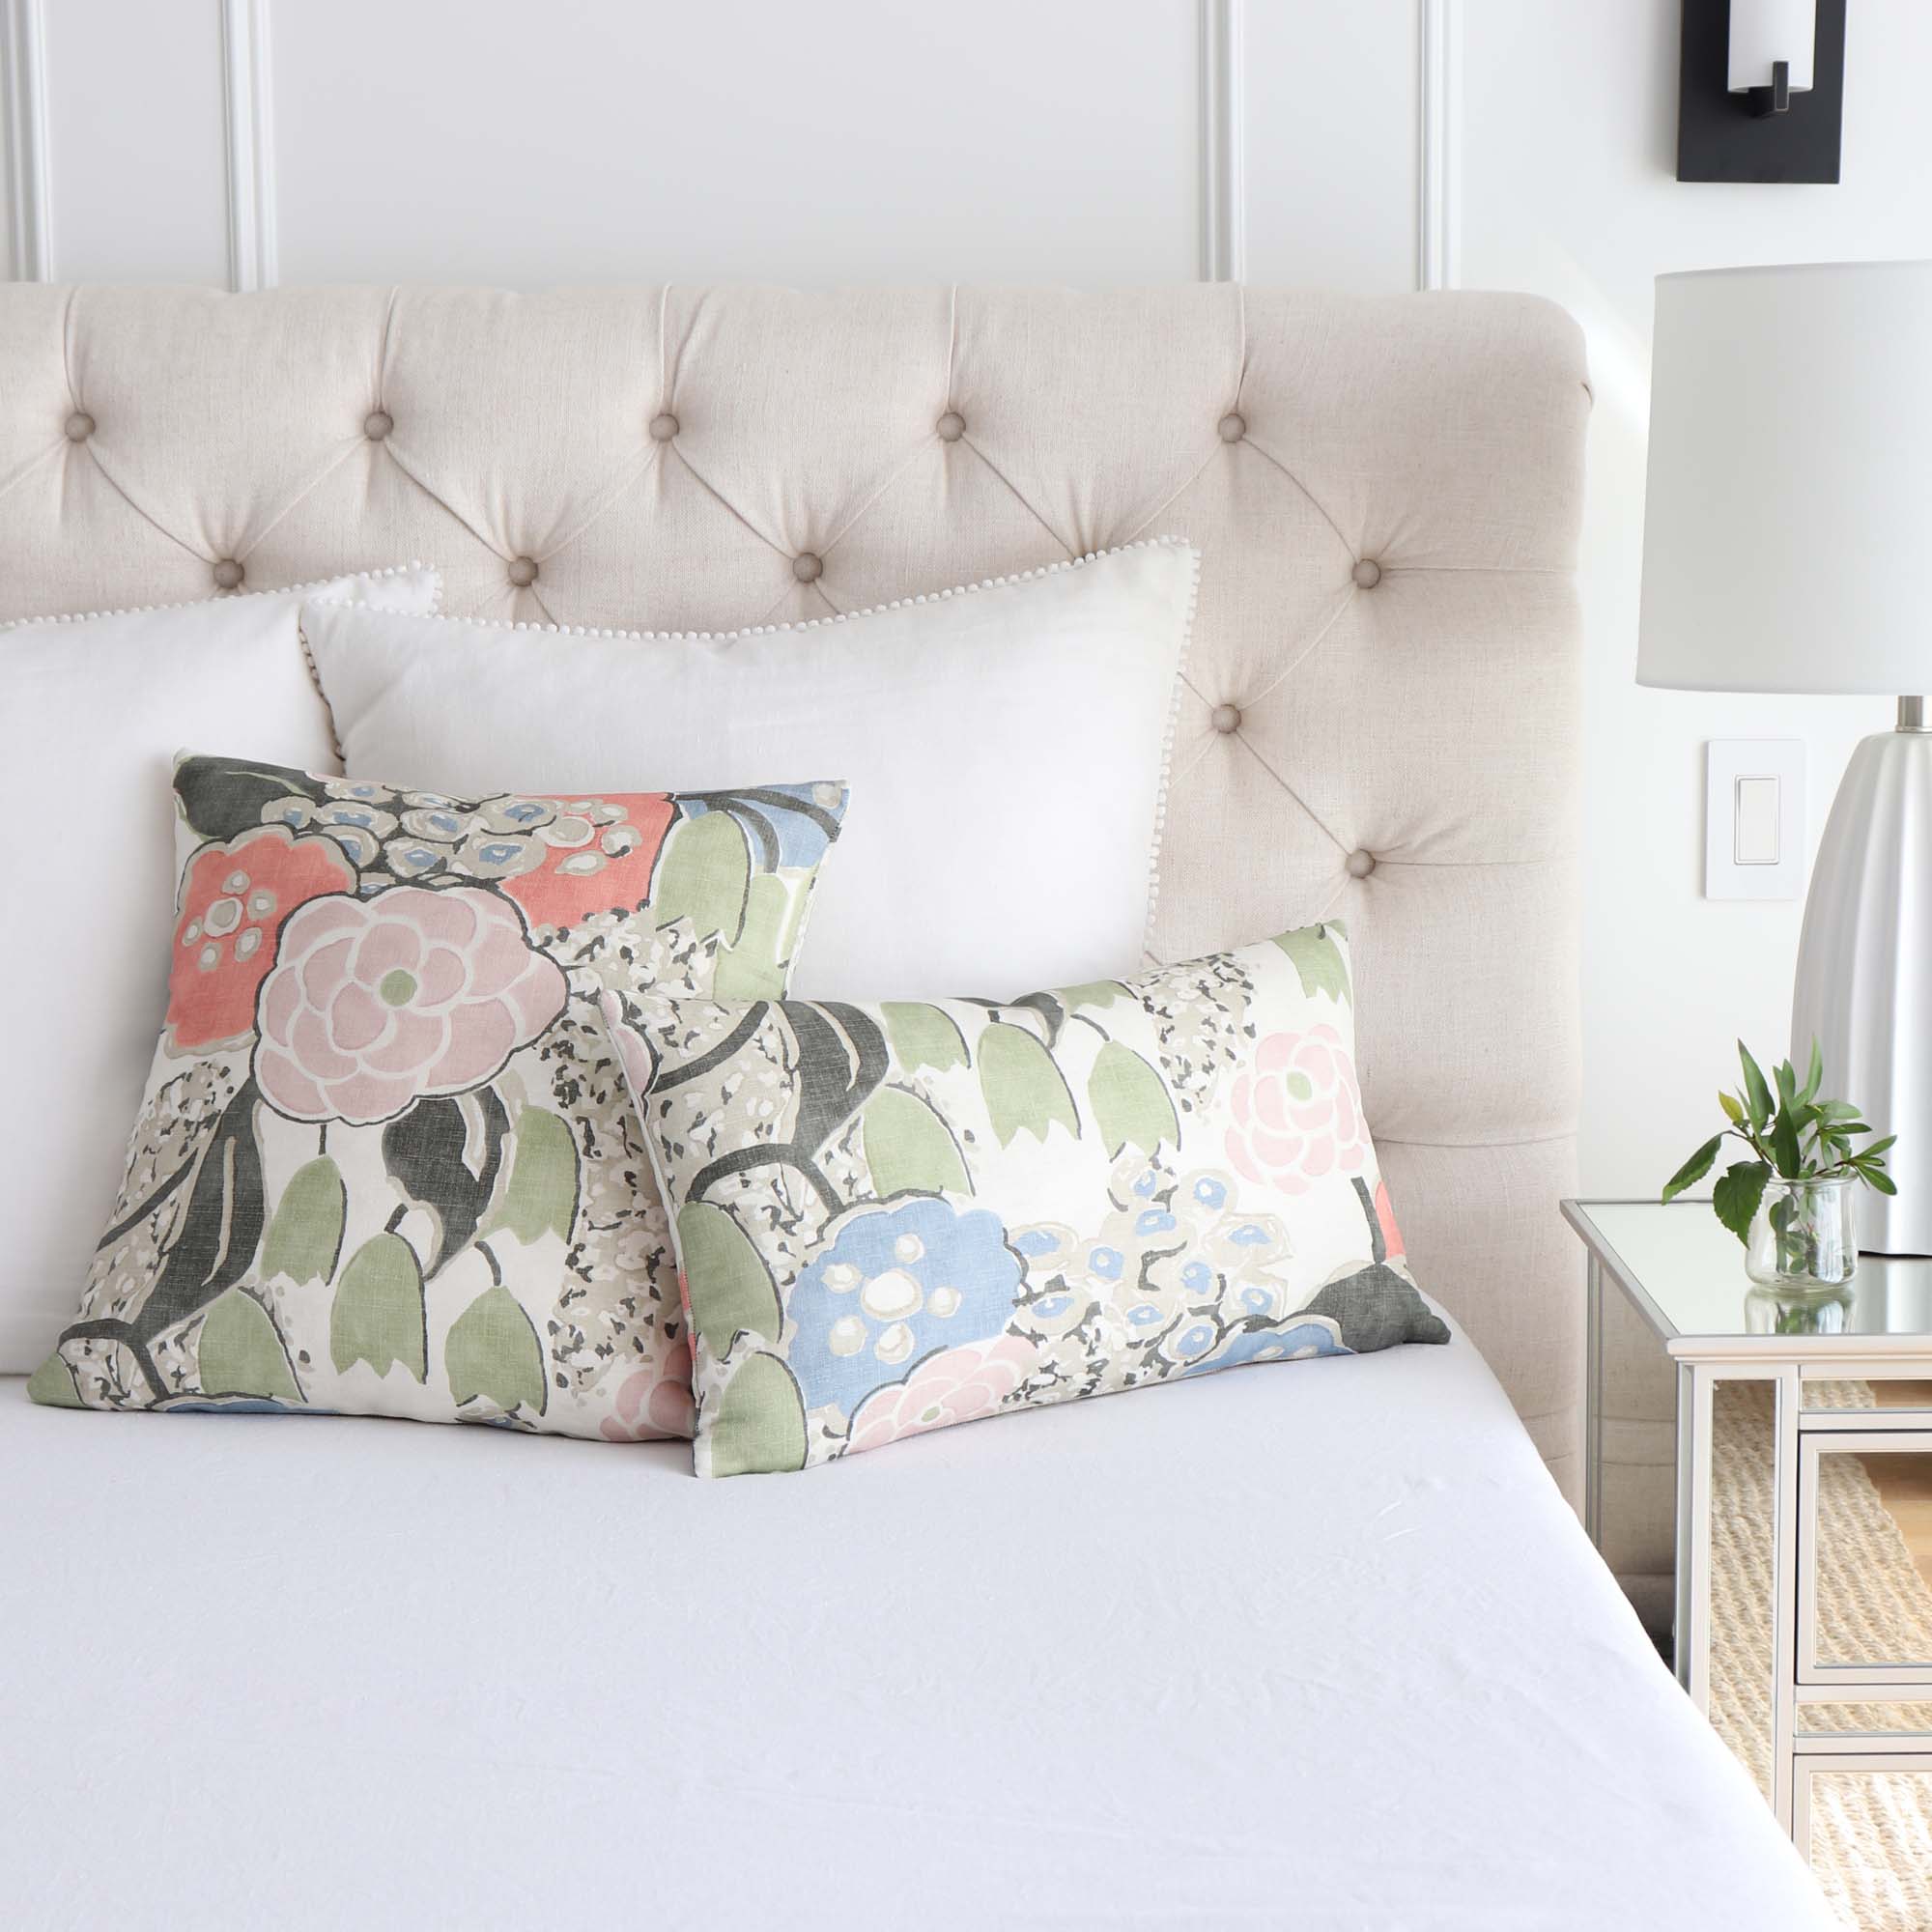 https://www.chloeandolive.com/cdn/shop/products/Thibaut-Anna-French-Laura-AF23100-Blush-Pink-Green-Floral-Linen-Designer-Decorative-Throw-Pillow-Cover-in-Bedroom-on-Bed_2000x.jpg?v=1680663264